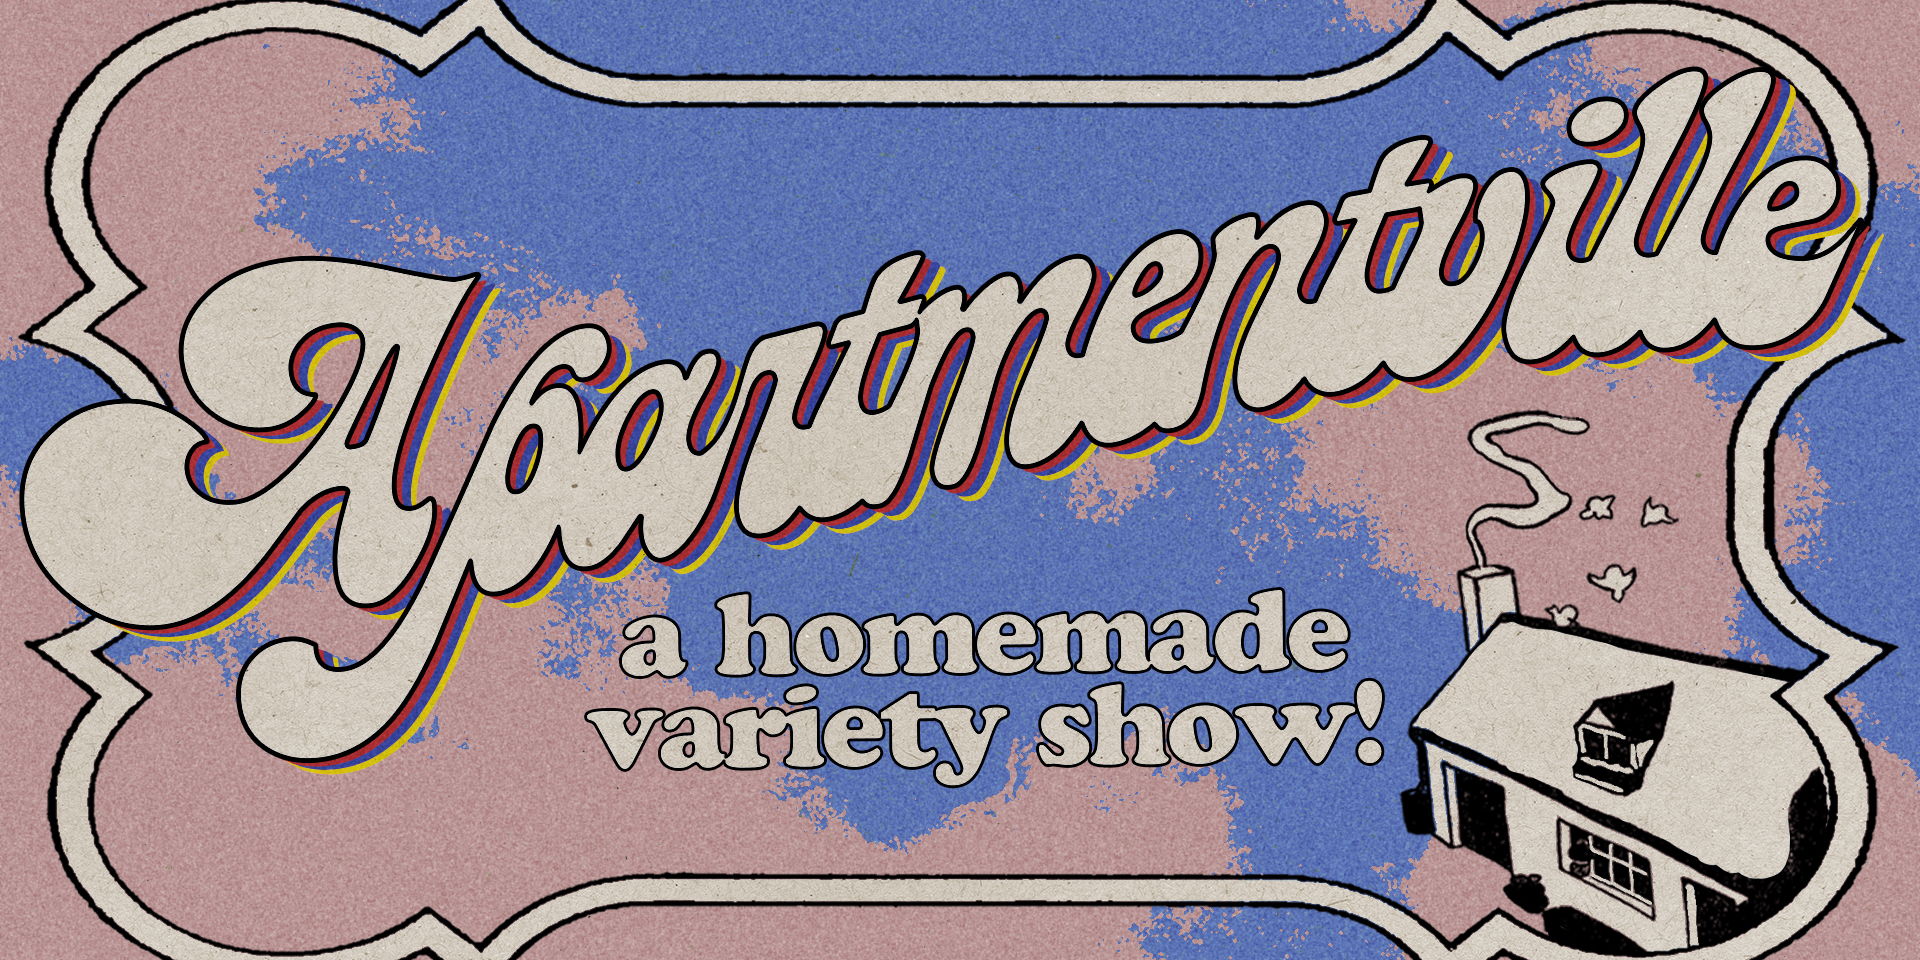 APARTMENTVILLE: A HOMEMADE VARIETY SHOW! promotional image